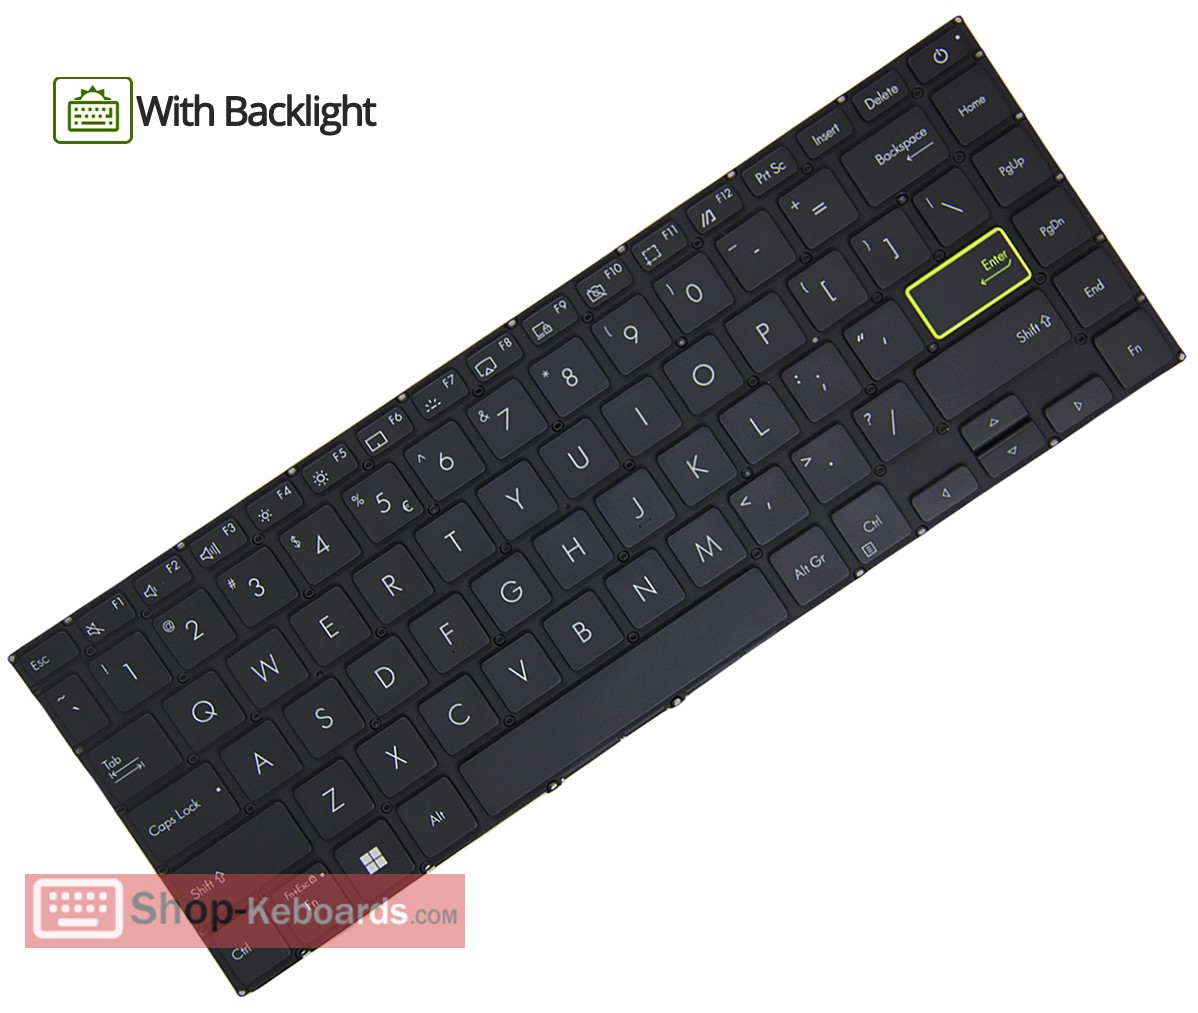 Asus 0KNB0-2820FR00 Keyboard replacement